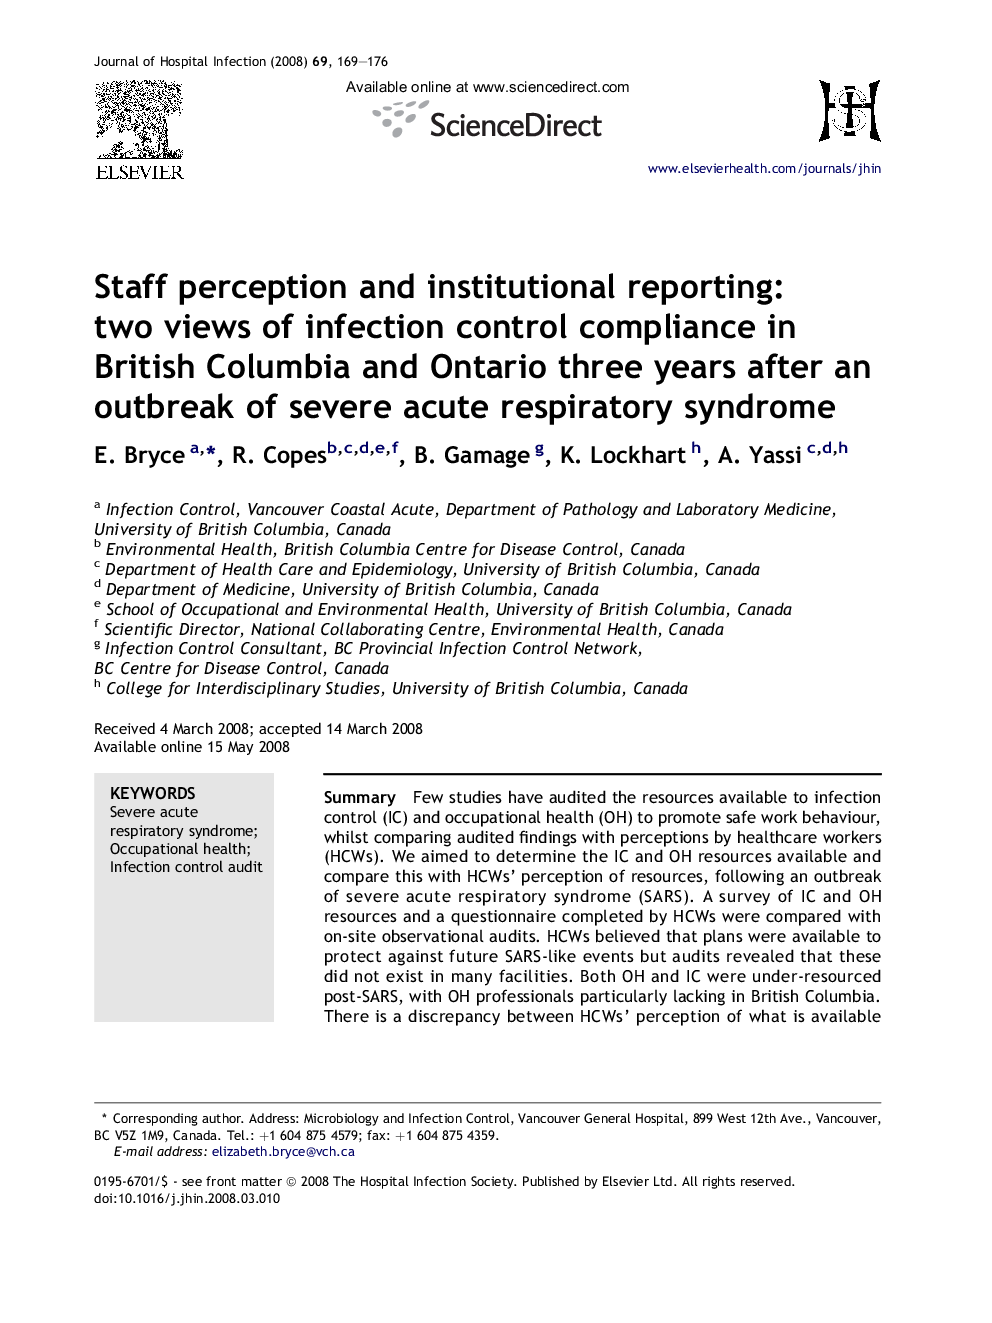 Staff perception and institutional reporting: two views of infection control compliance in British Columbia and Ontario three years after an outbreak of severe acute respiratory syndrome